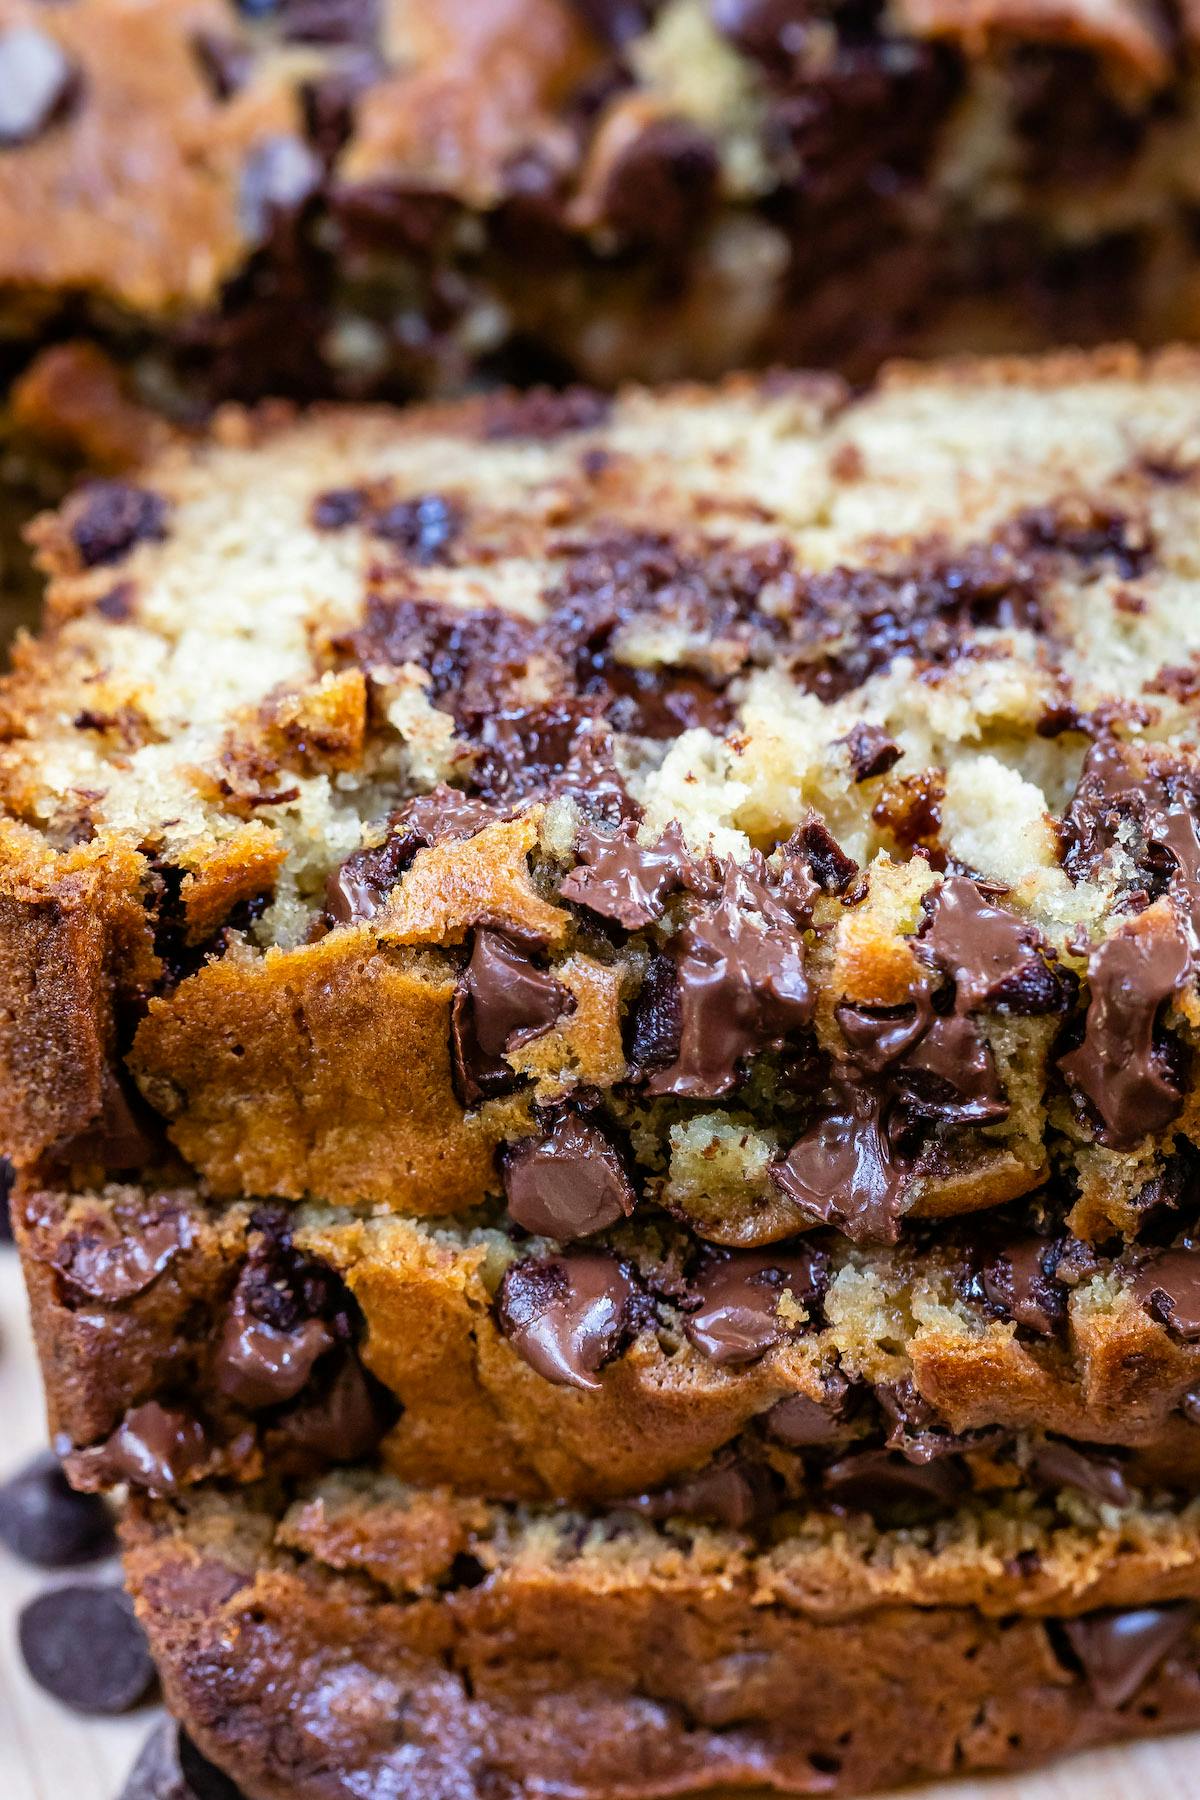 sliced banana bread with melted chocolate chips baked in.